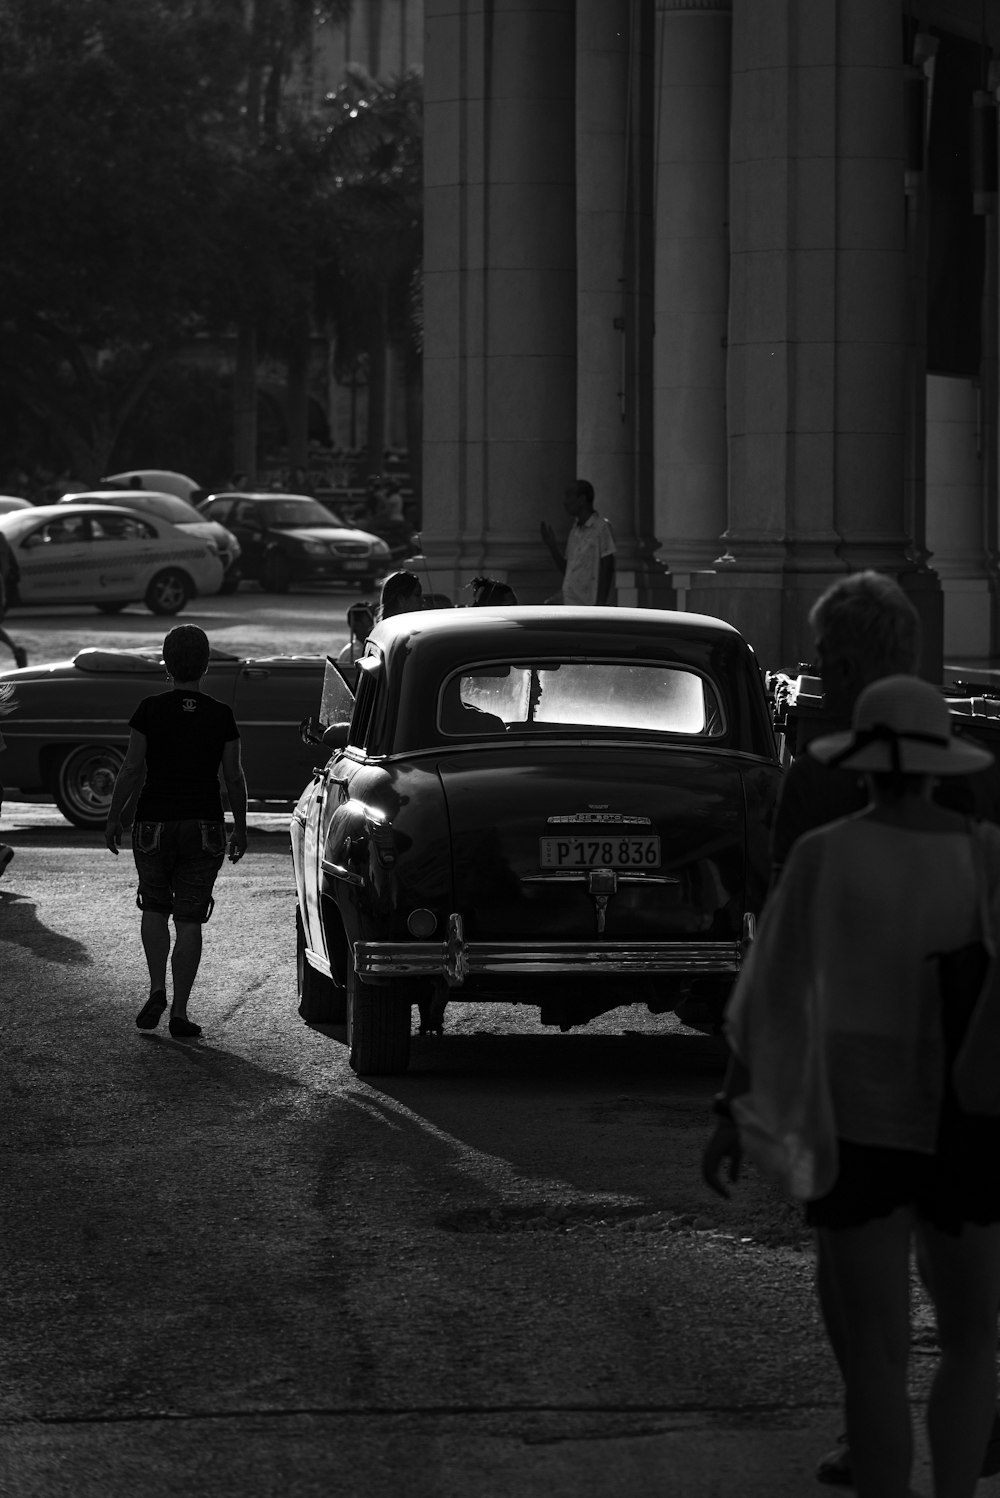 grayscale photo of vehicles and people on street